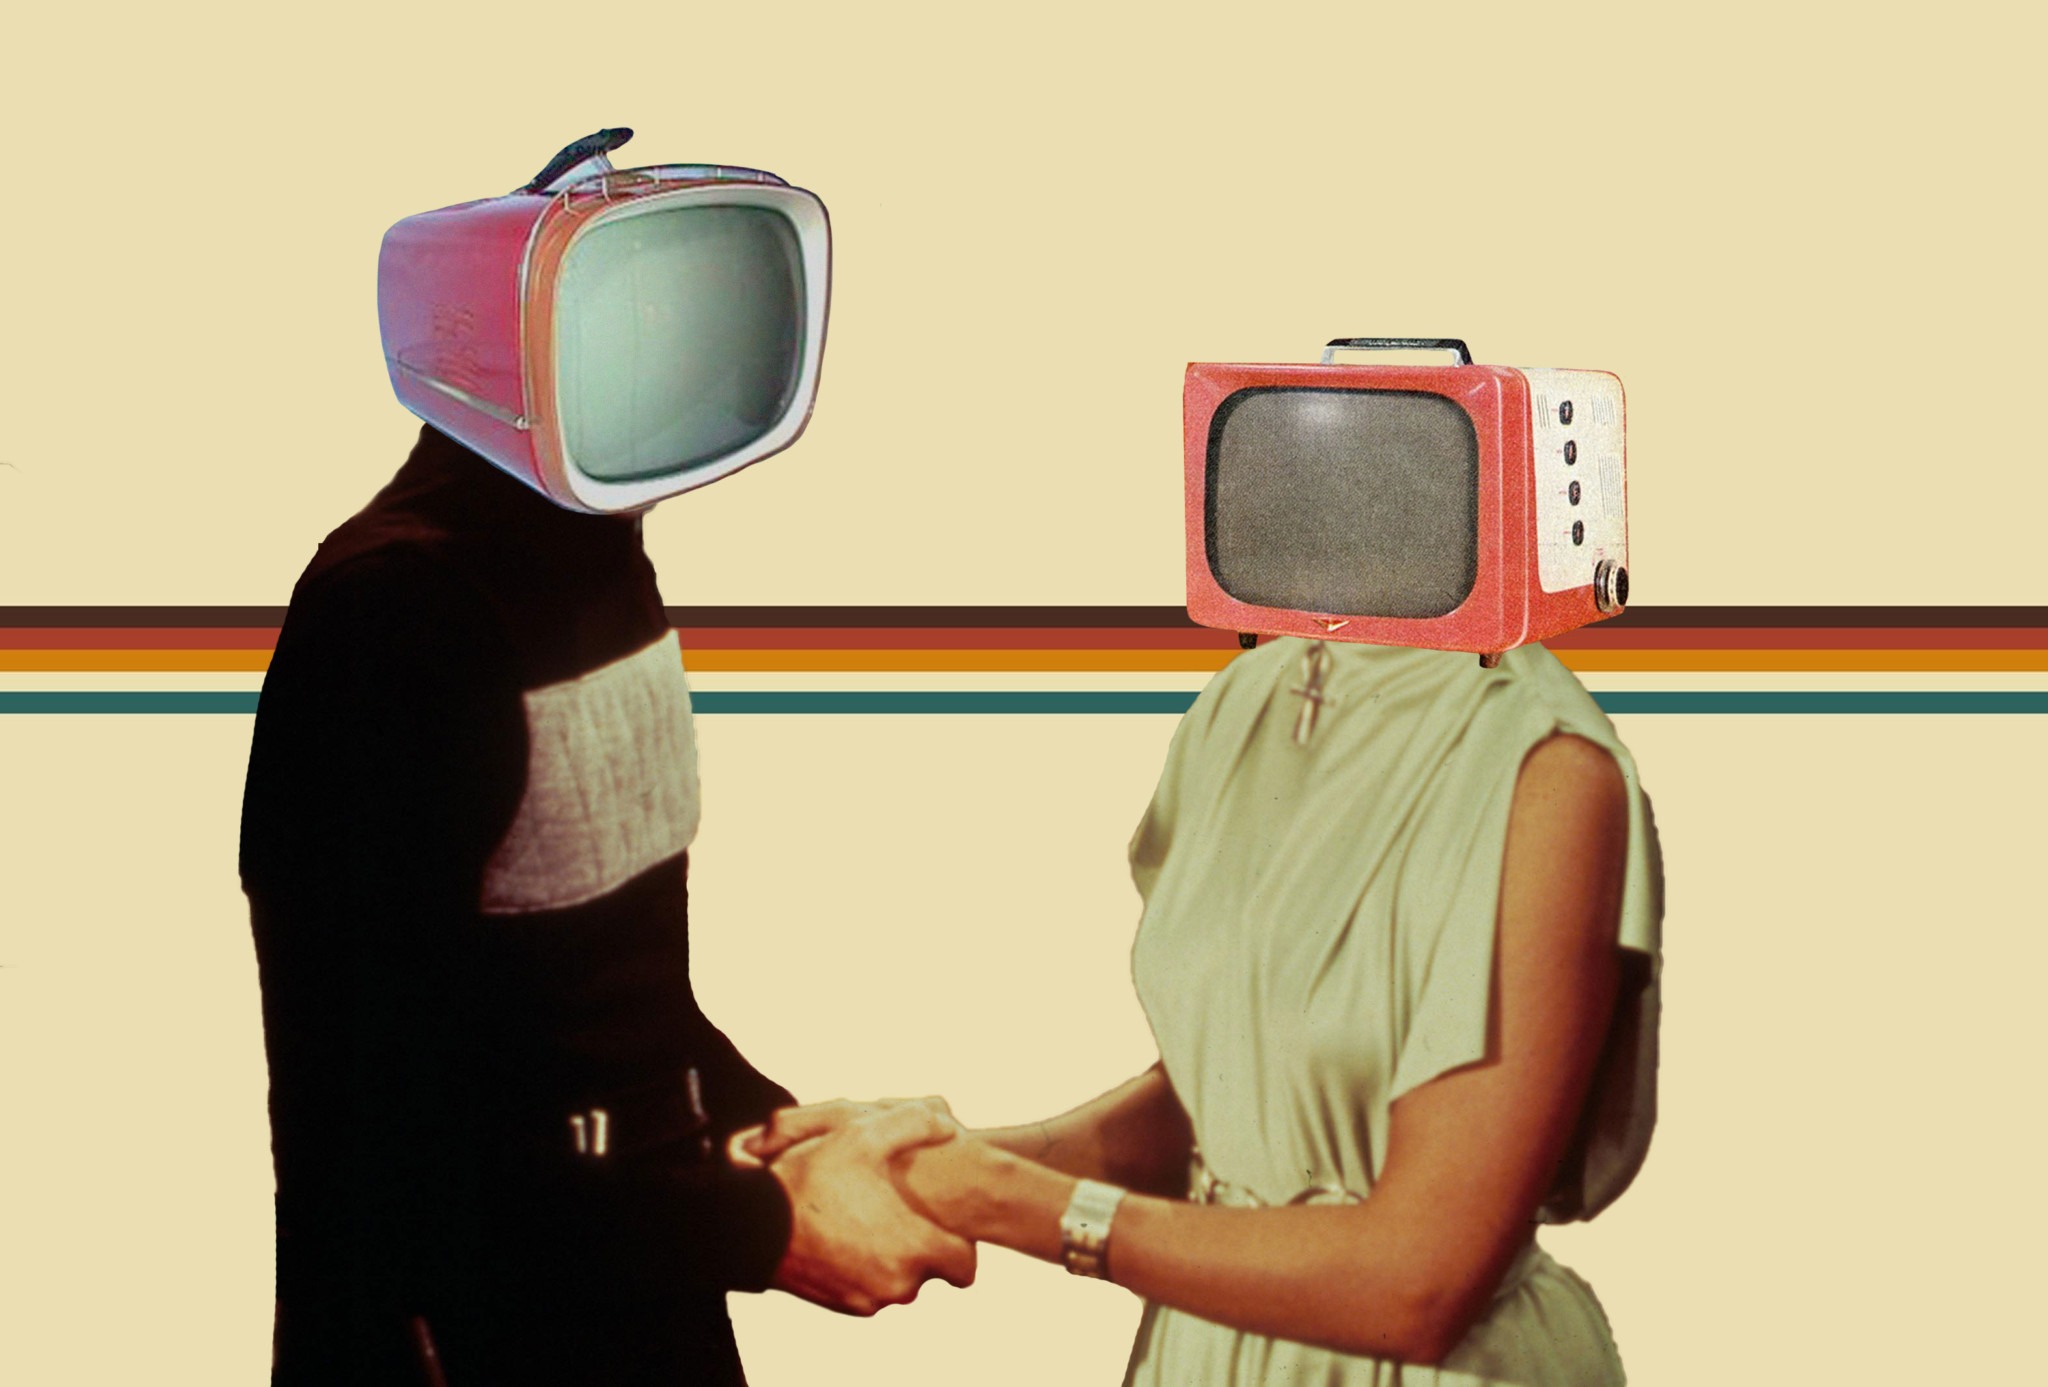 retro collage art, collage art. ... Using vintage and new images creates surreal